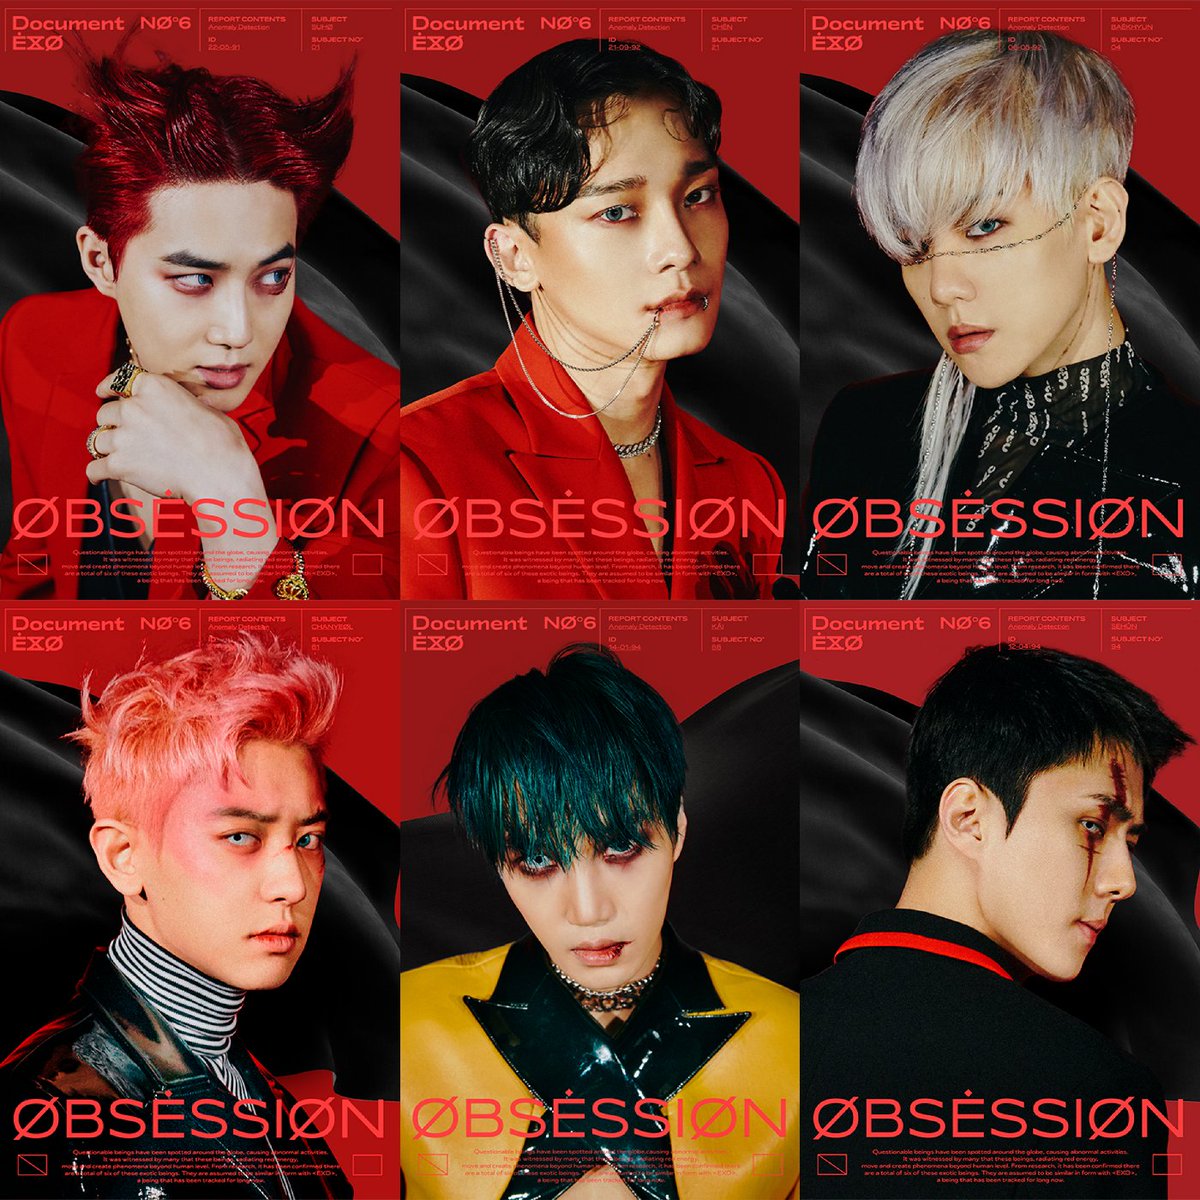 Baby exols, are you excited for the comeback??? 

#TimeForOBSESSION #ObsessedWithEXO #OBSESSION #엑소 #EXODEUX #weareoneEXO #EXOonearewe @weareoneEXO @exoonearewe